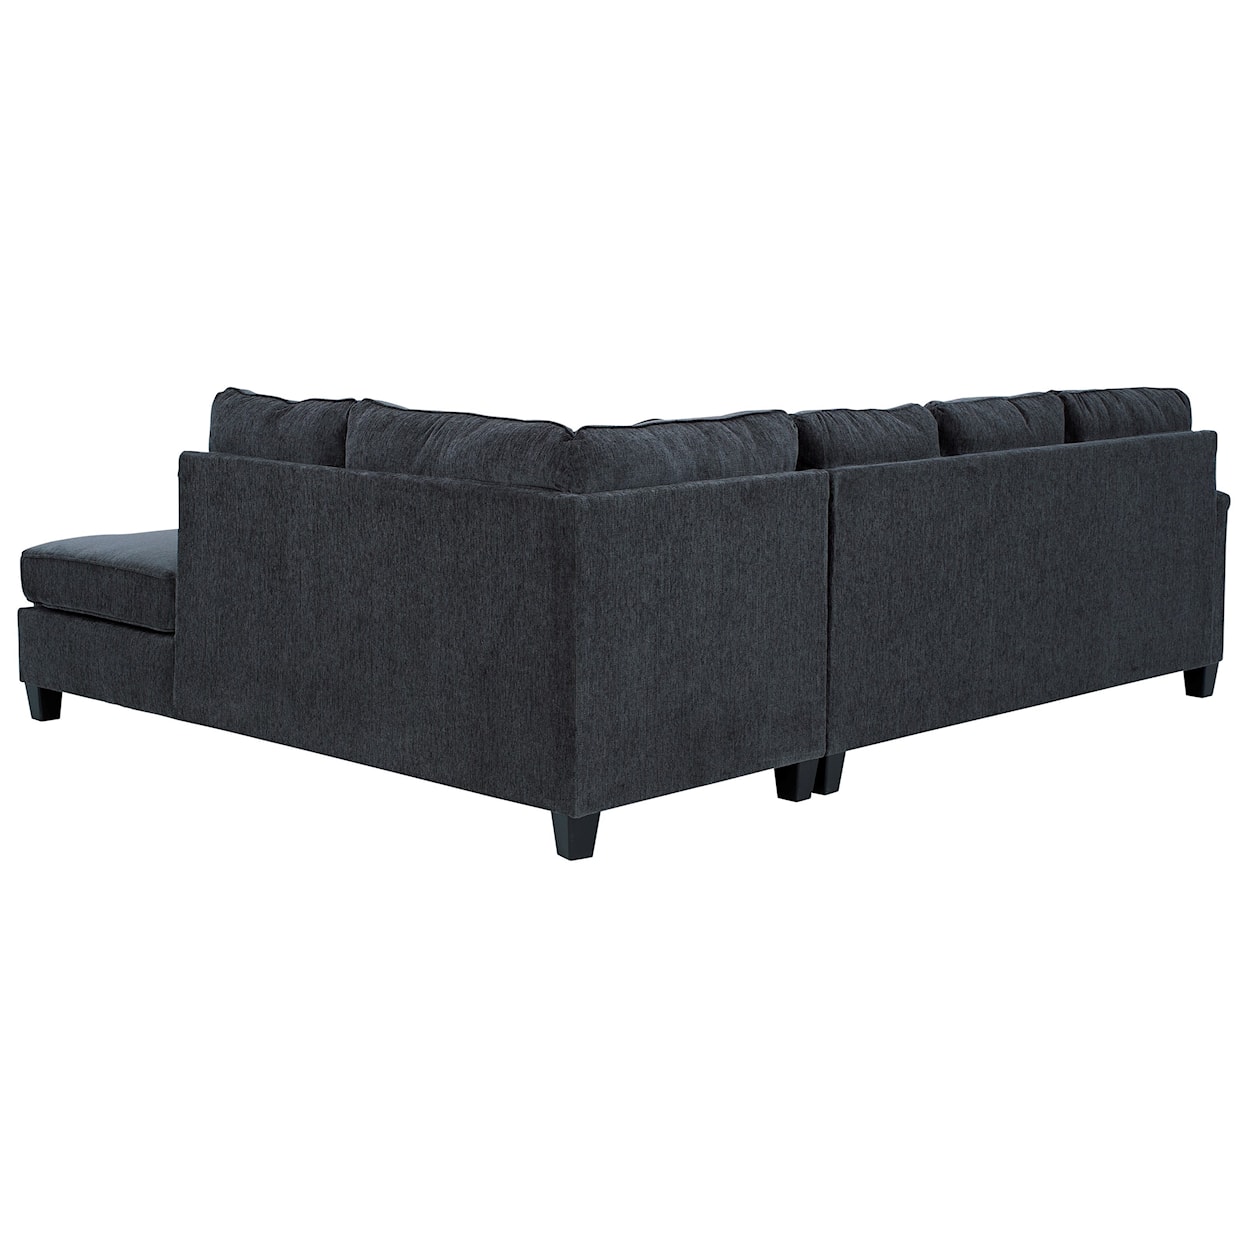 StyleLine Abinger 2-Piece Sectional w/ Chaise and Sleeper